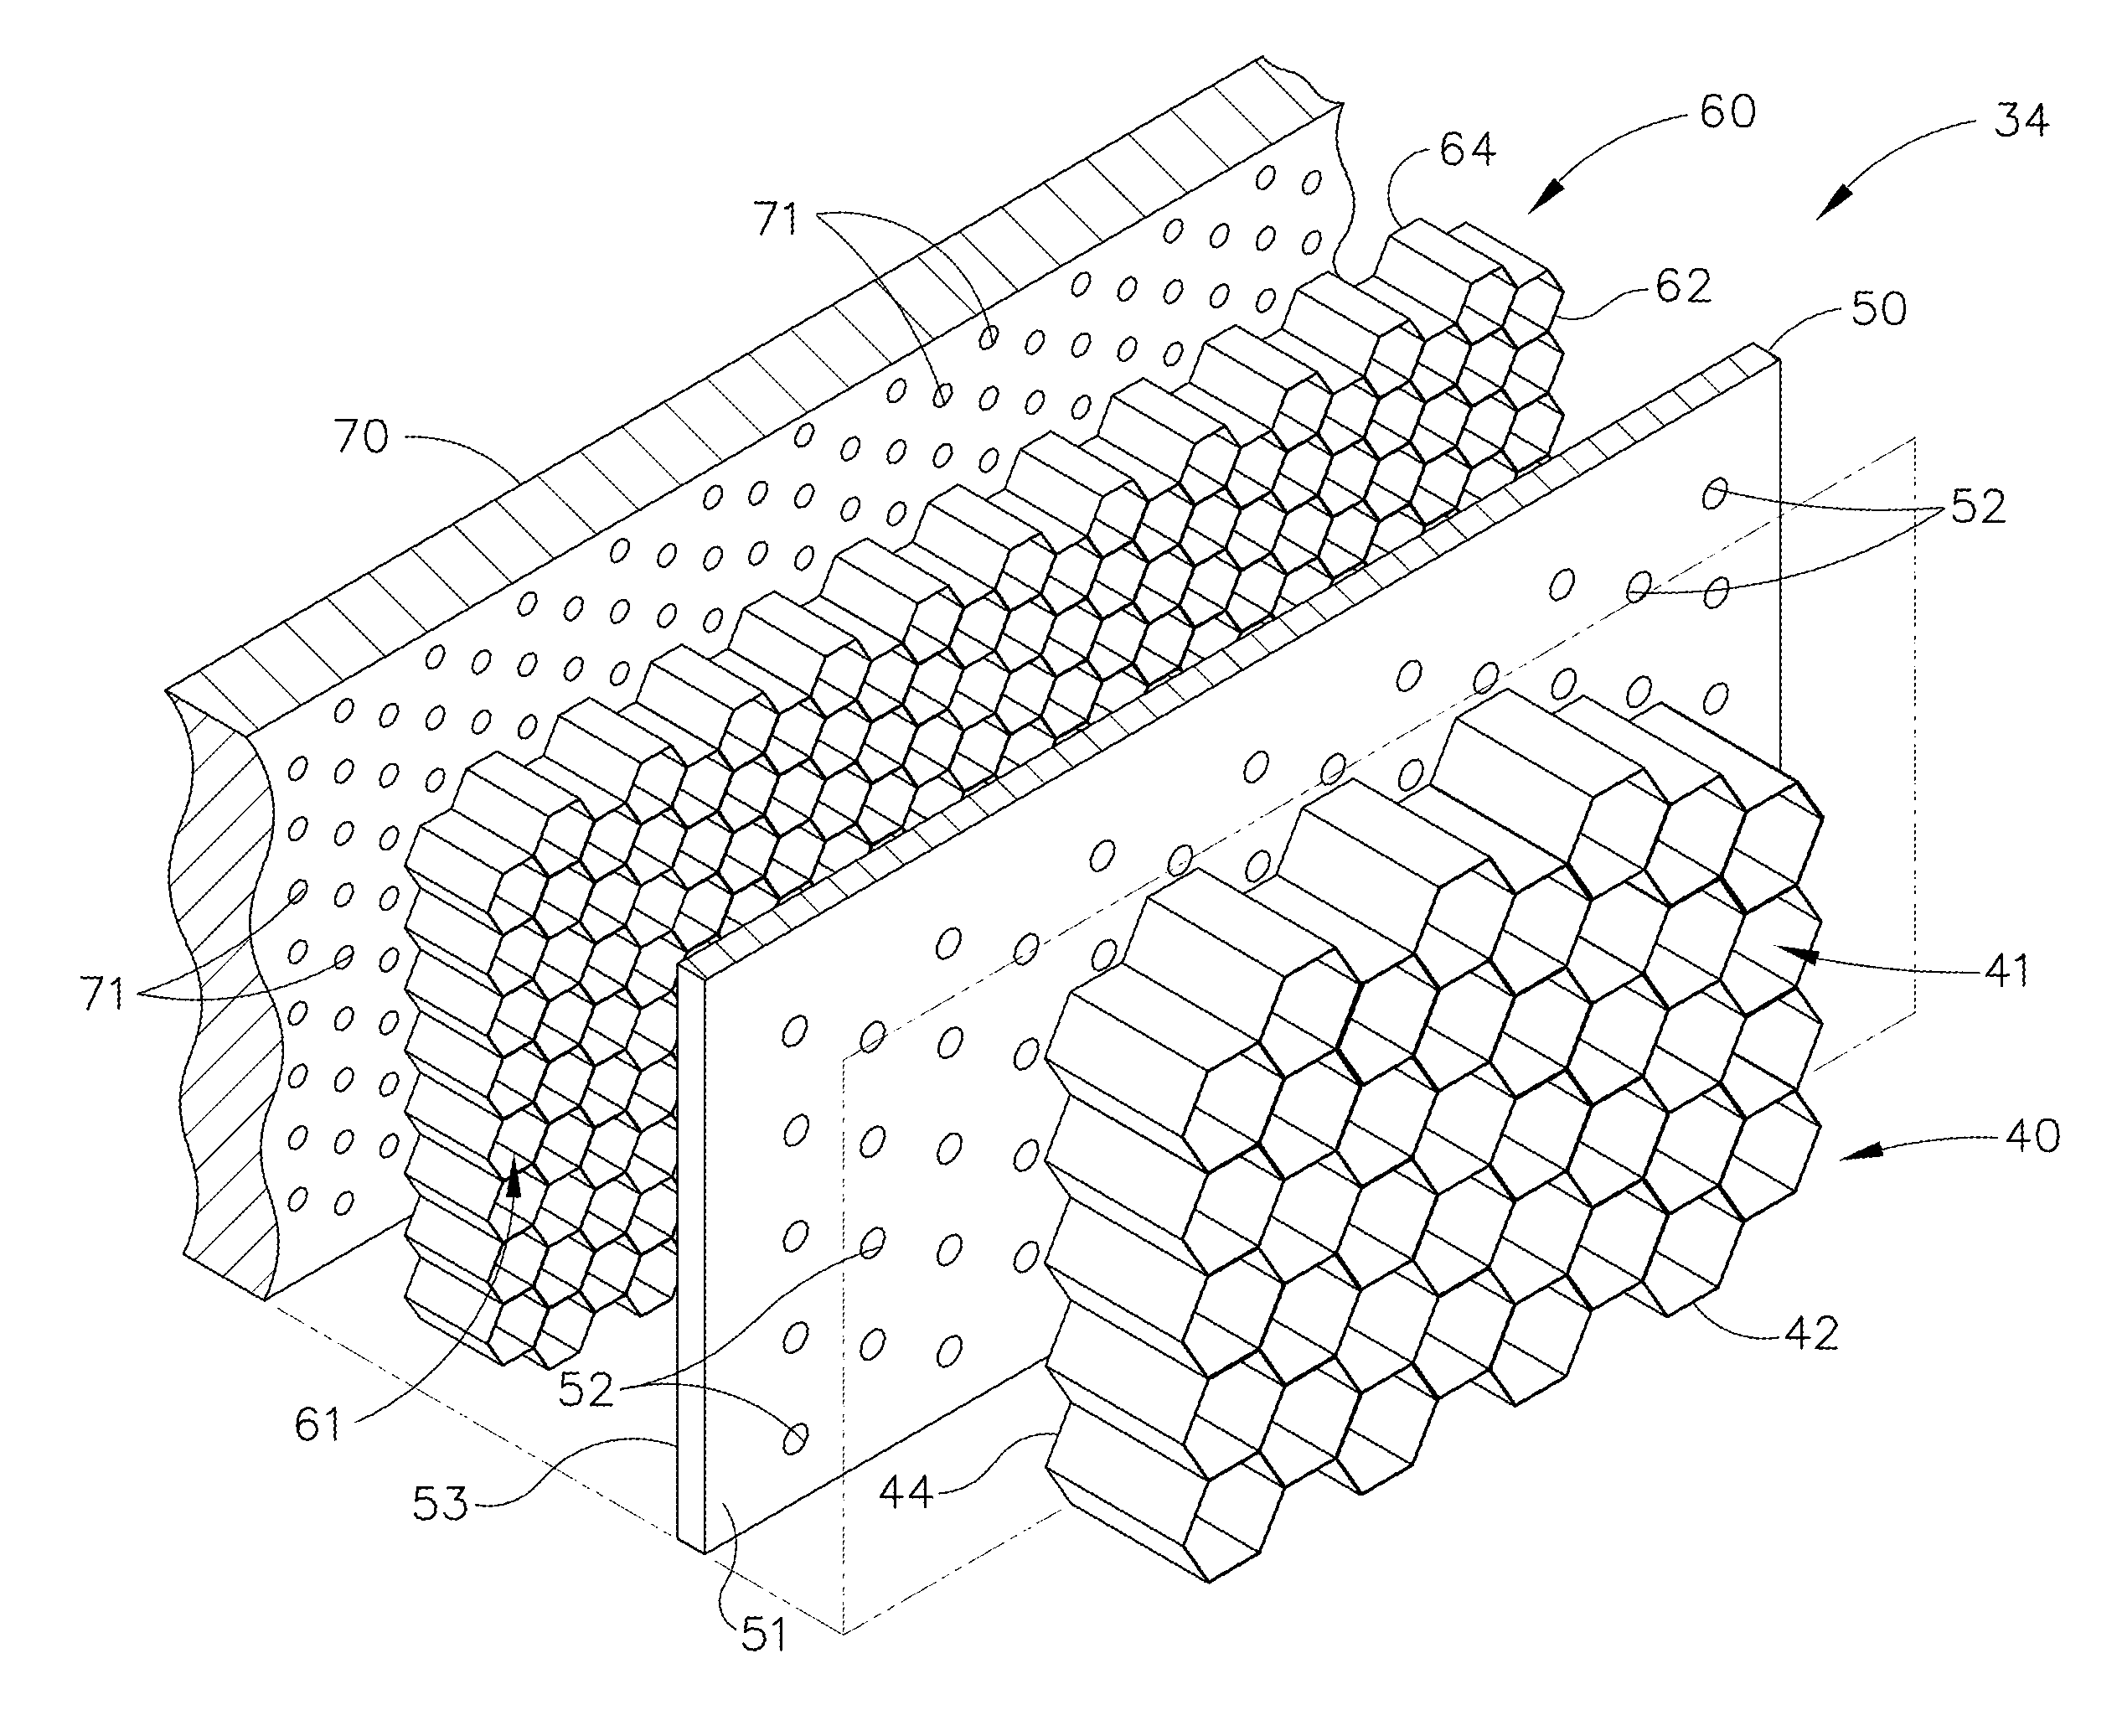 Gas turbine laminate seal assembly comprising first and second honeycomb layer and a perforated intermediate seal plate in-between